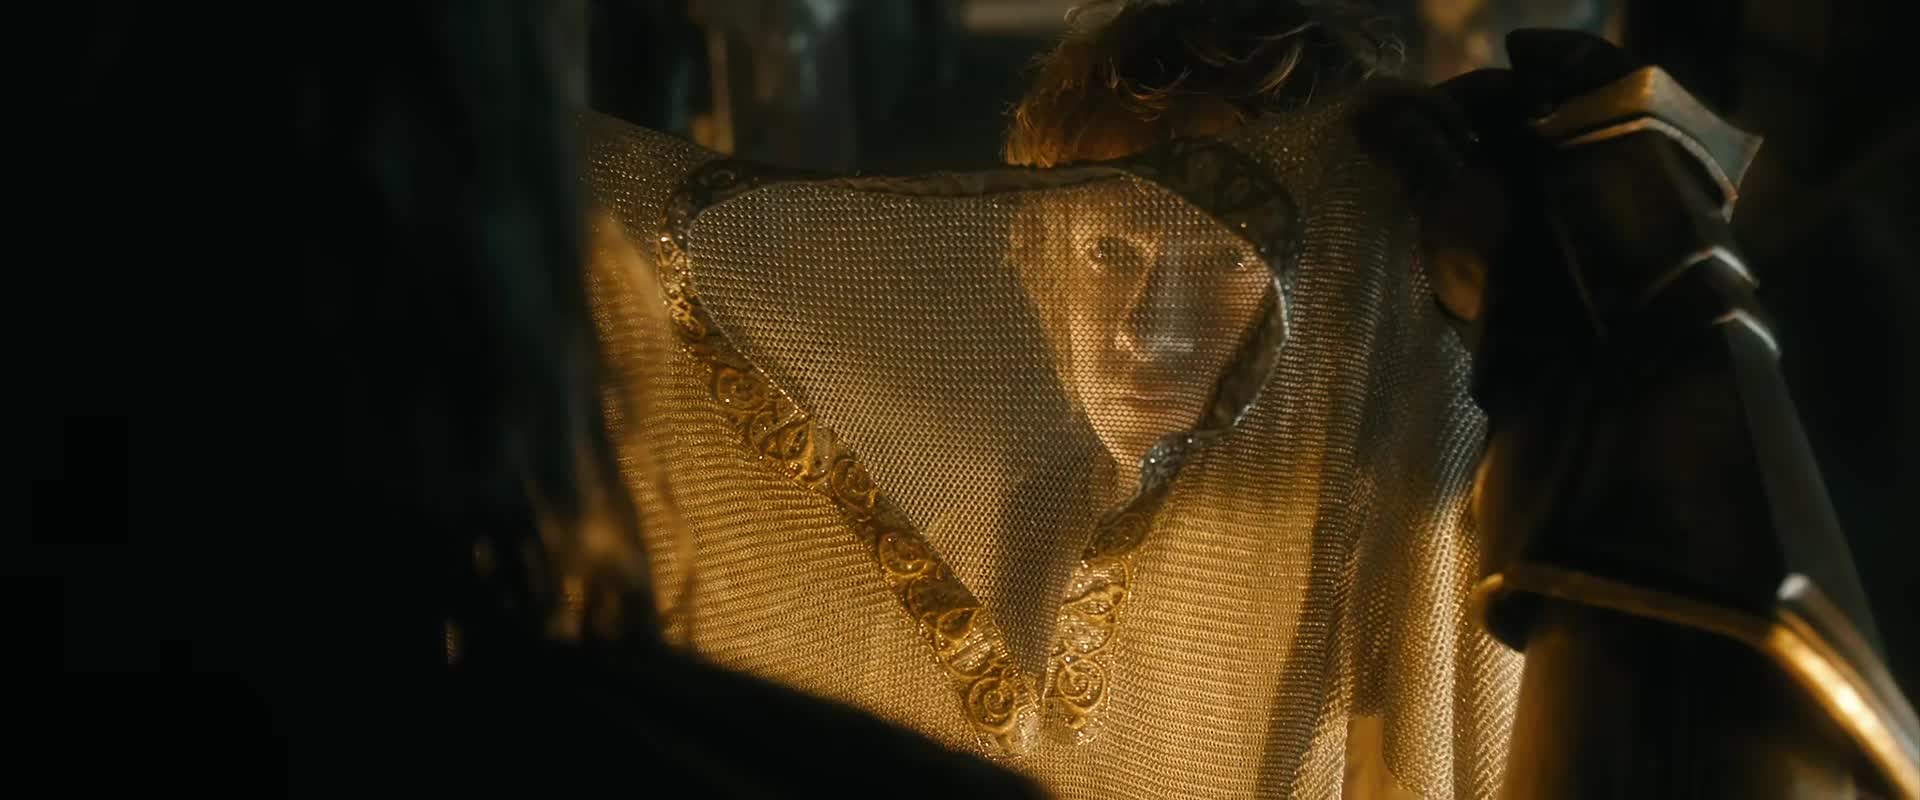 Loading Screenshot for The Hobbit: The Battle of the Five Armies (2014)